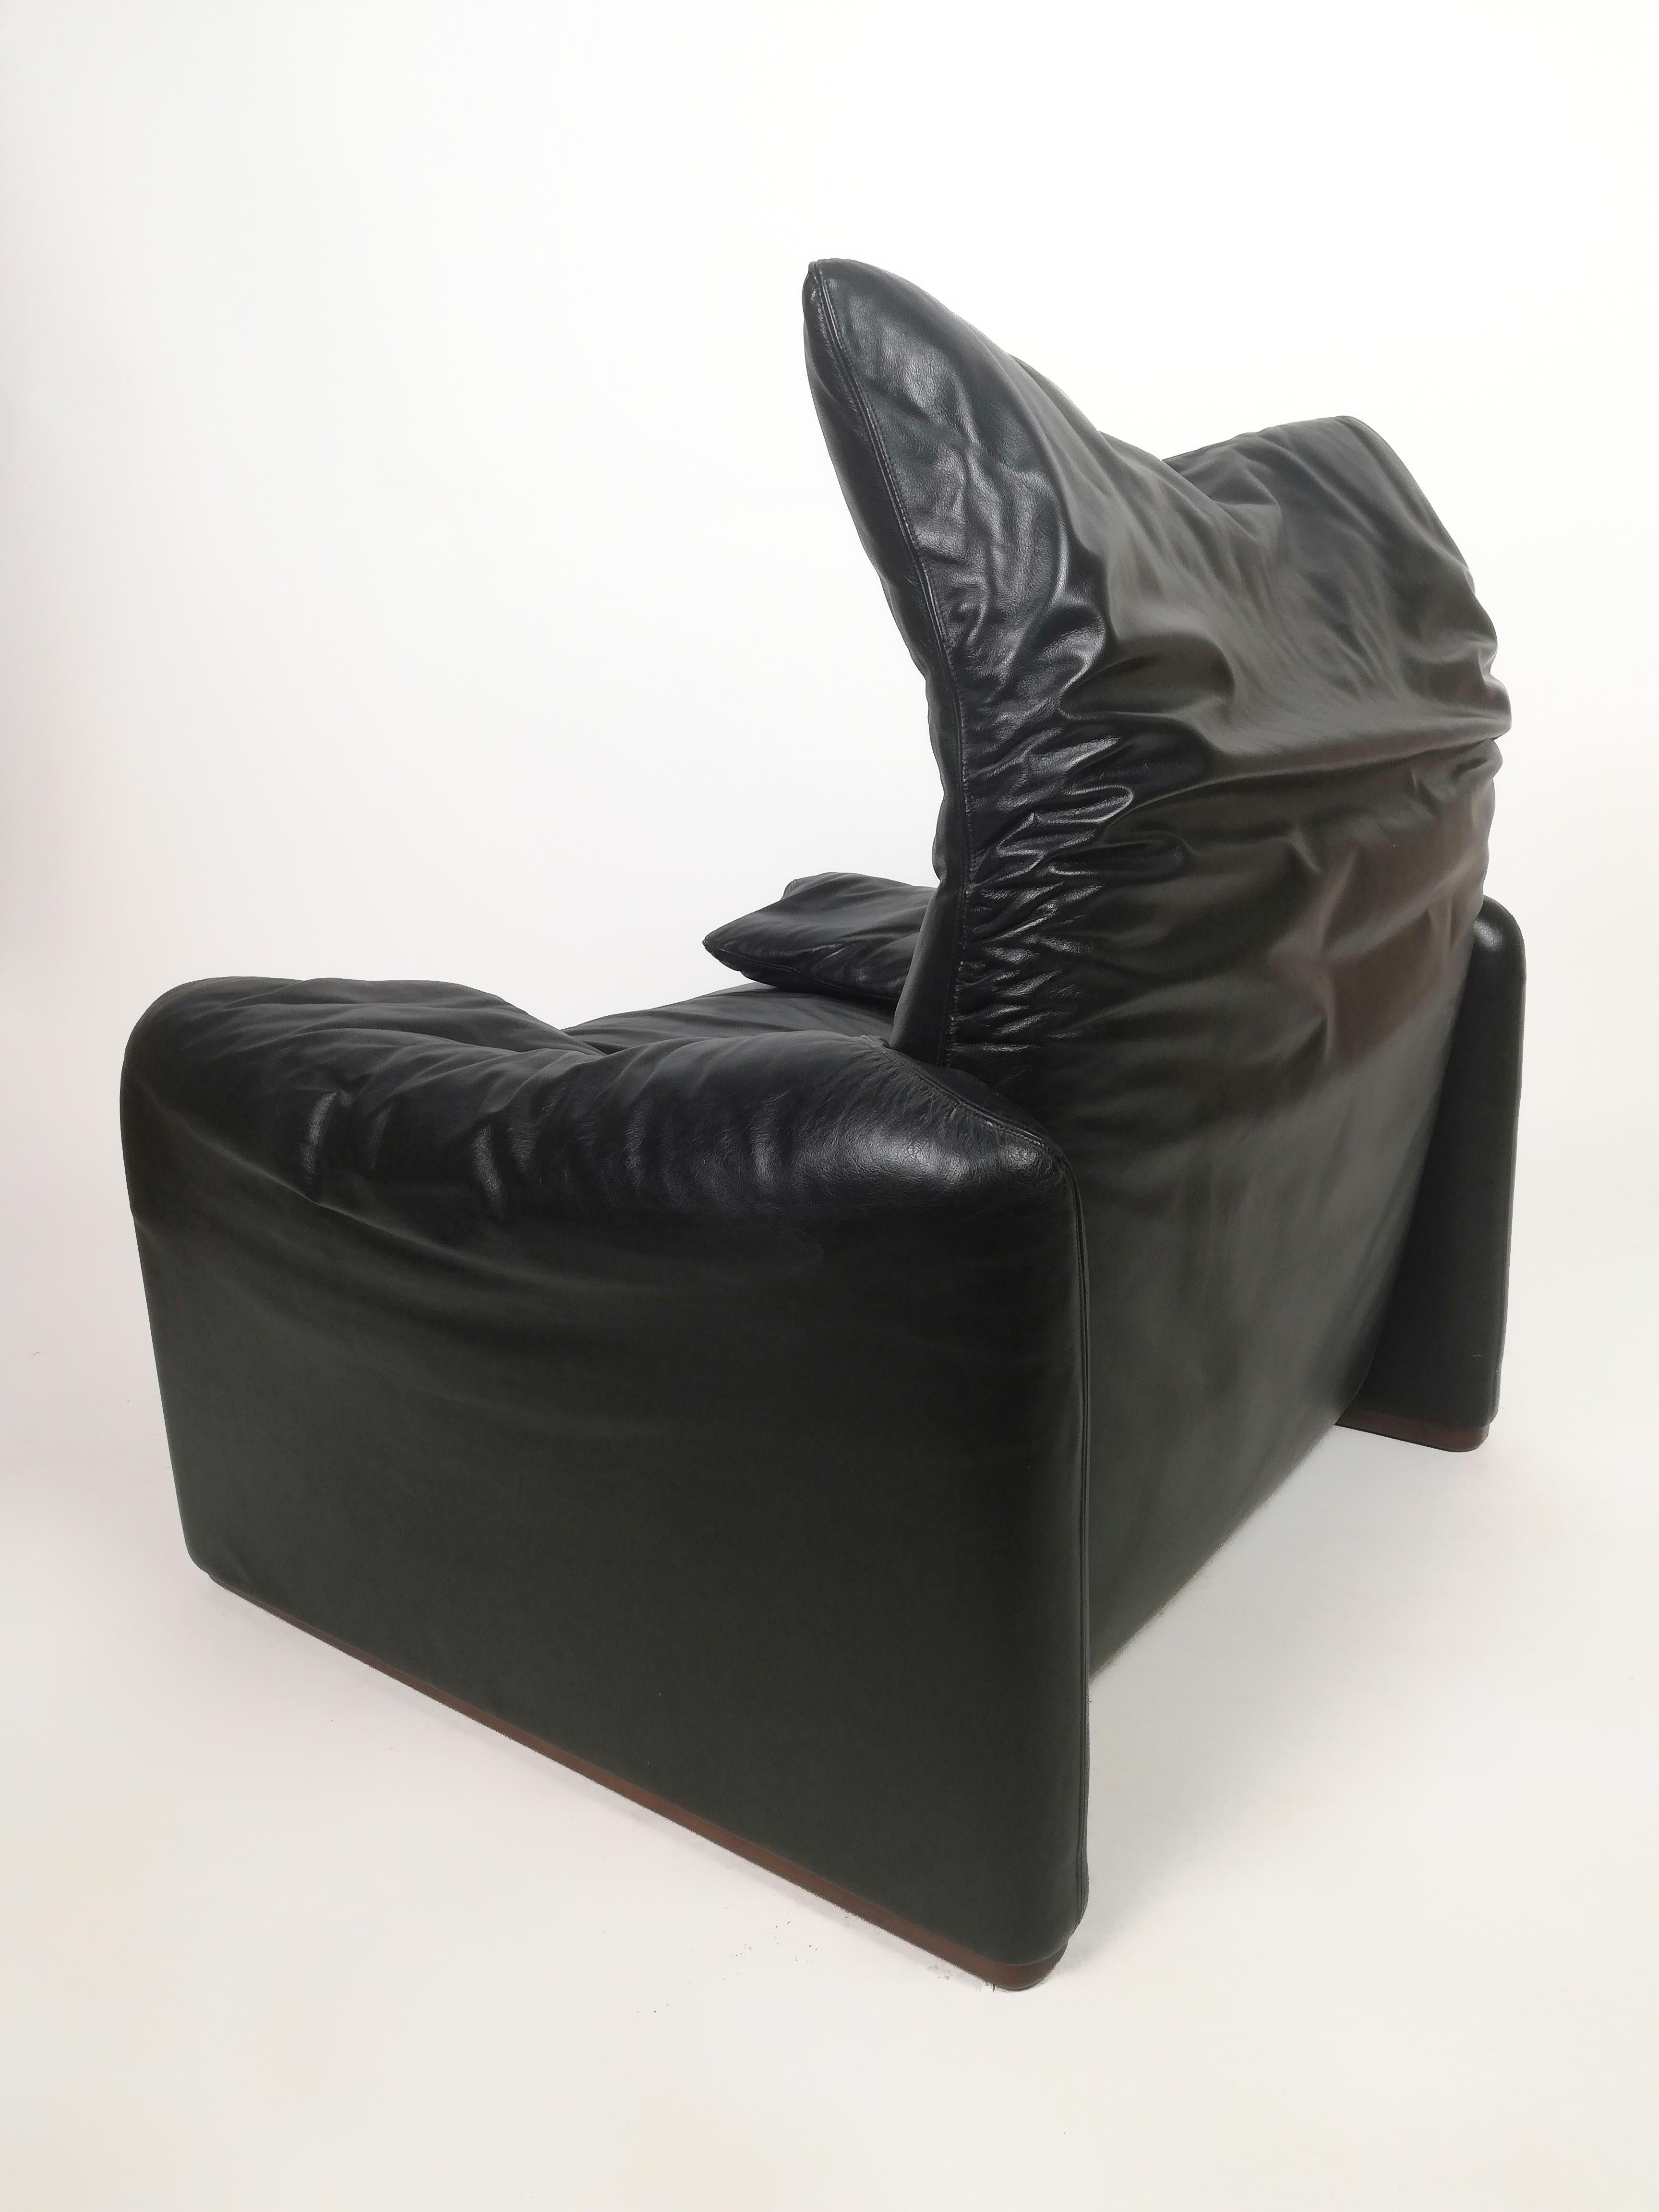 Set of Two Maralunga Black Leather Armchairs by Vico Magistretti For Sale 5